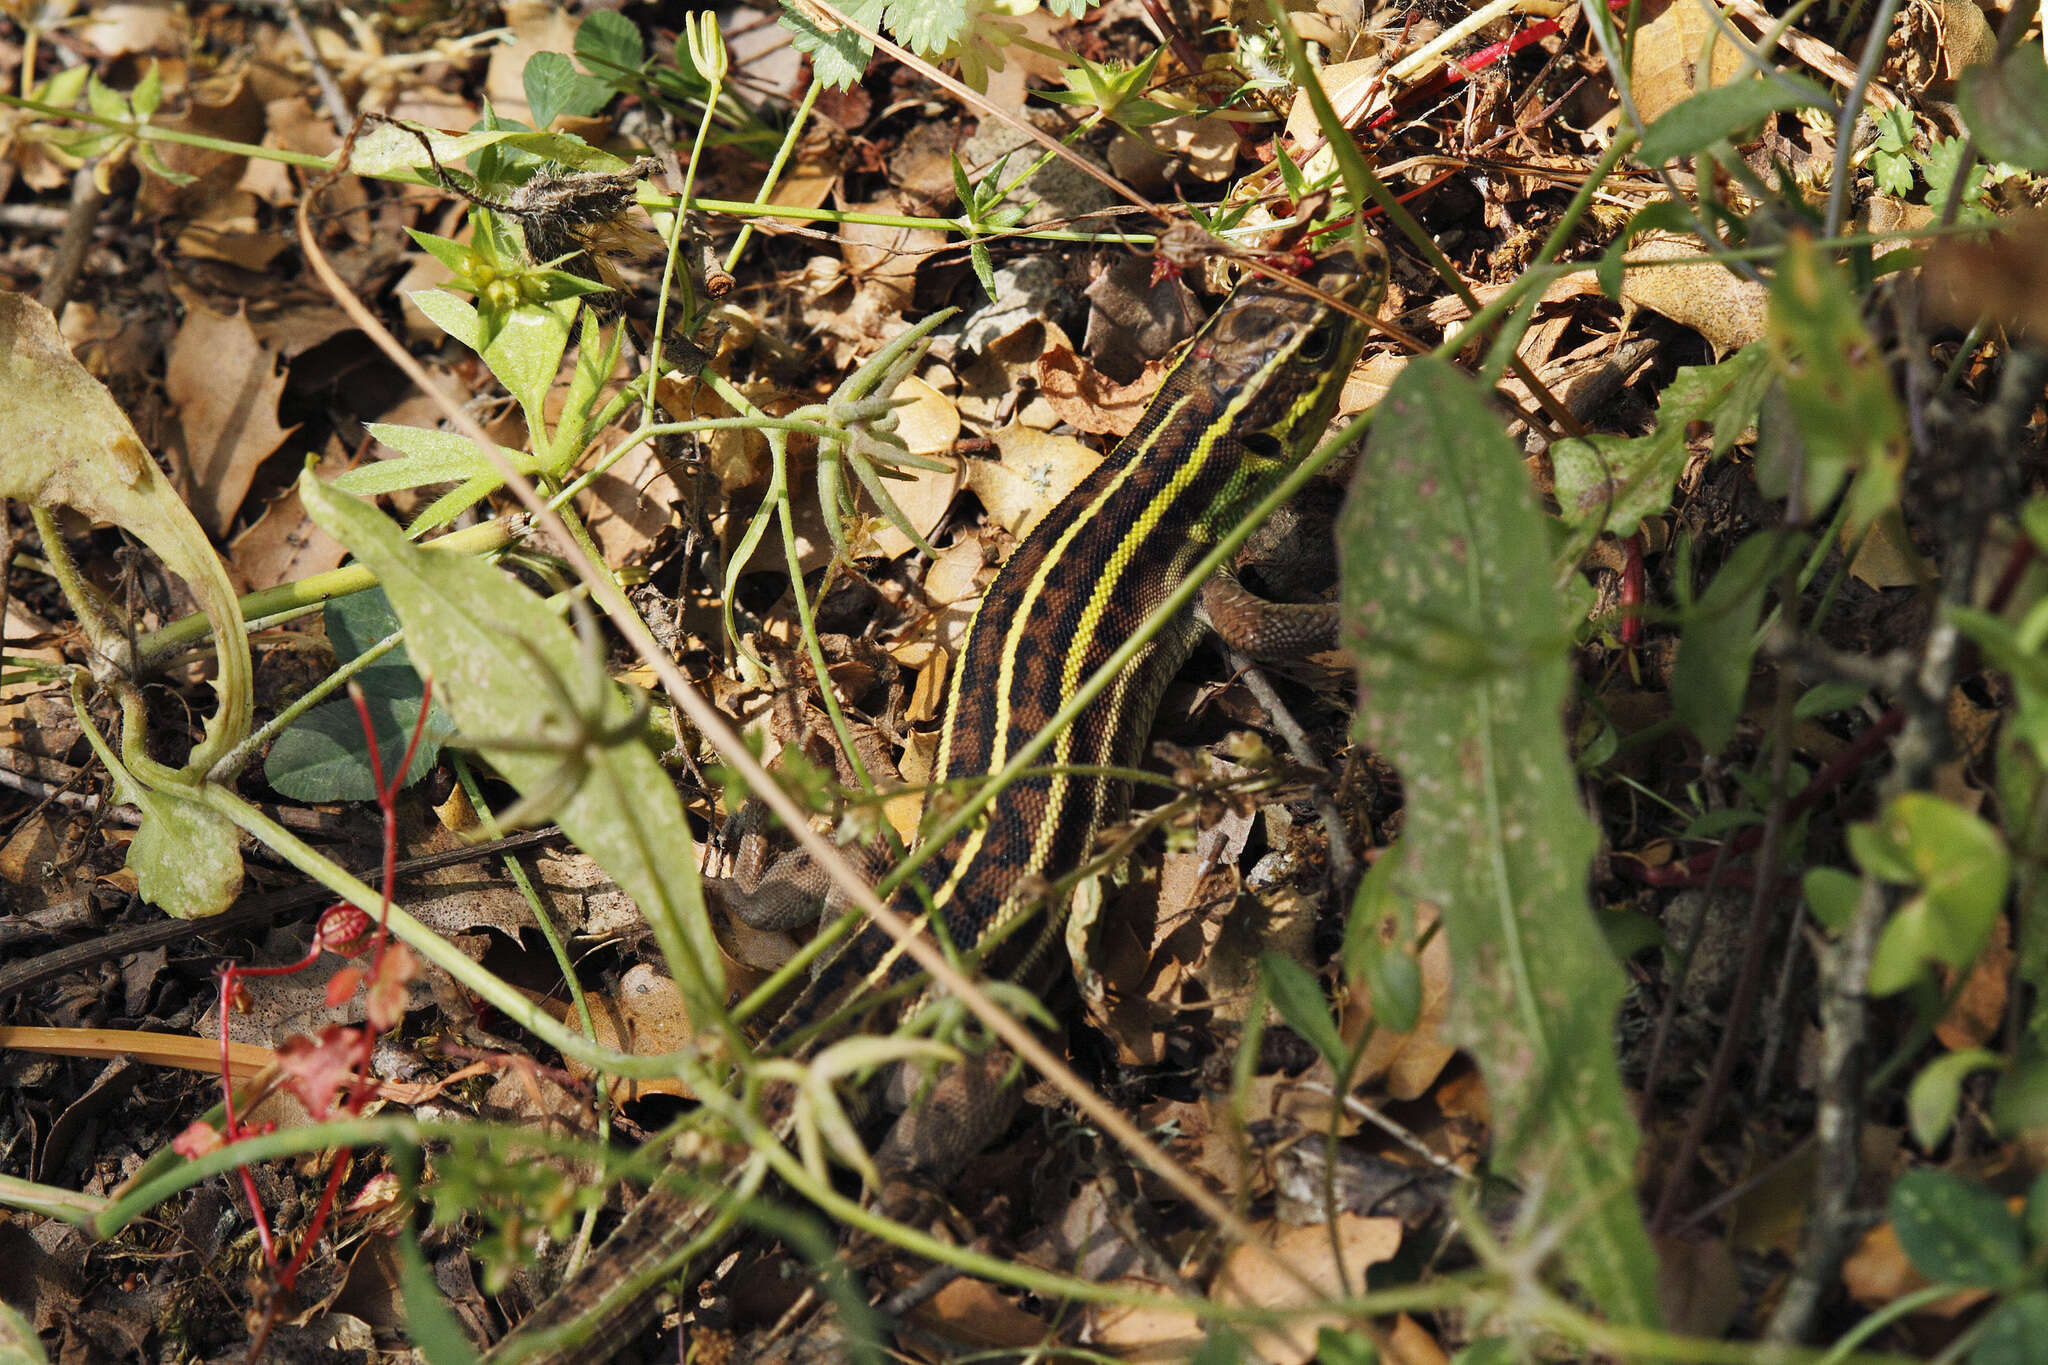 Image of Lacerta diplochondrodes cariensis